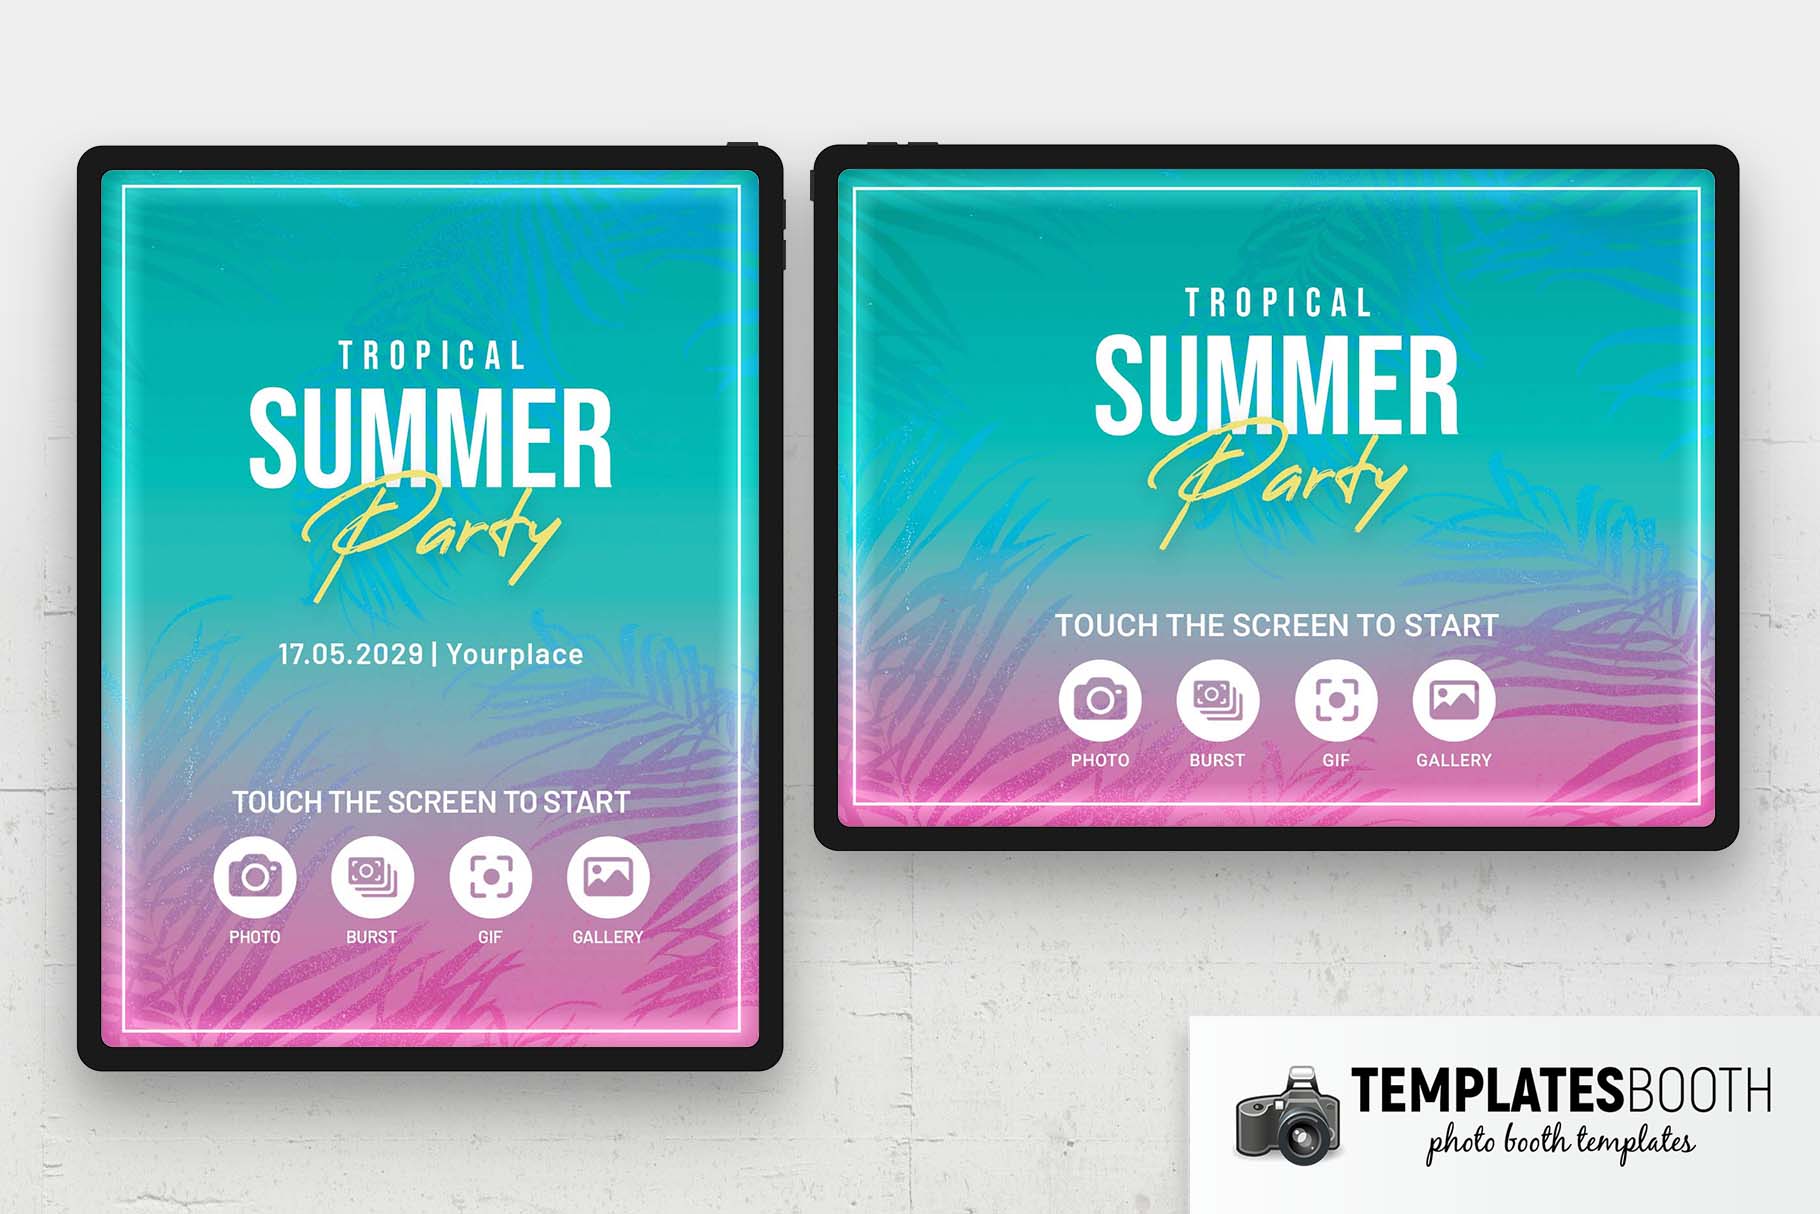 Tropical Summer Party Photo Booth Welcome Screen